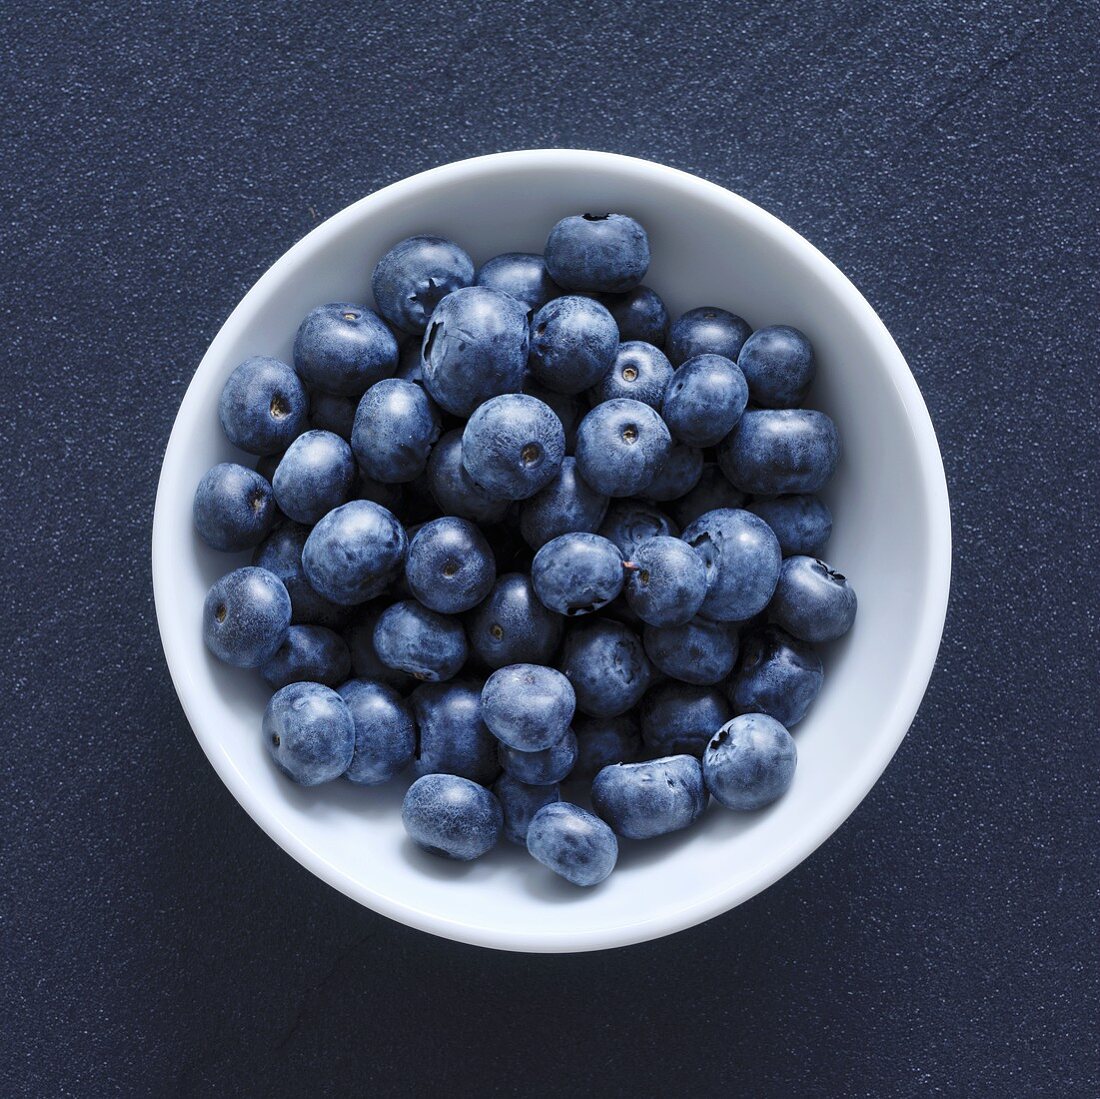 Blueberries in small white bowl